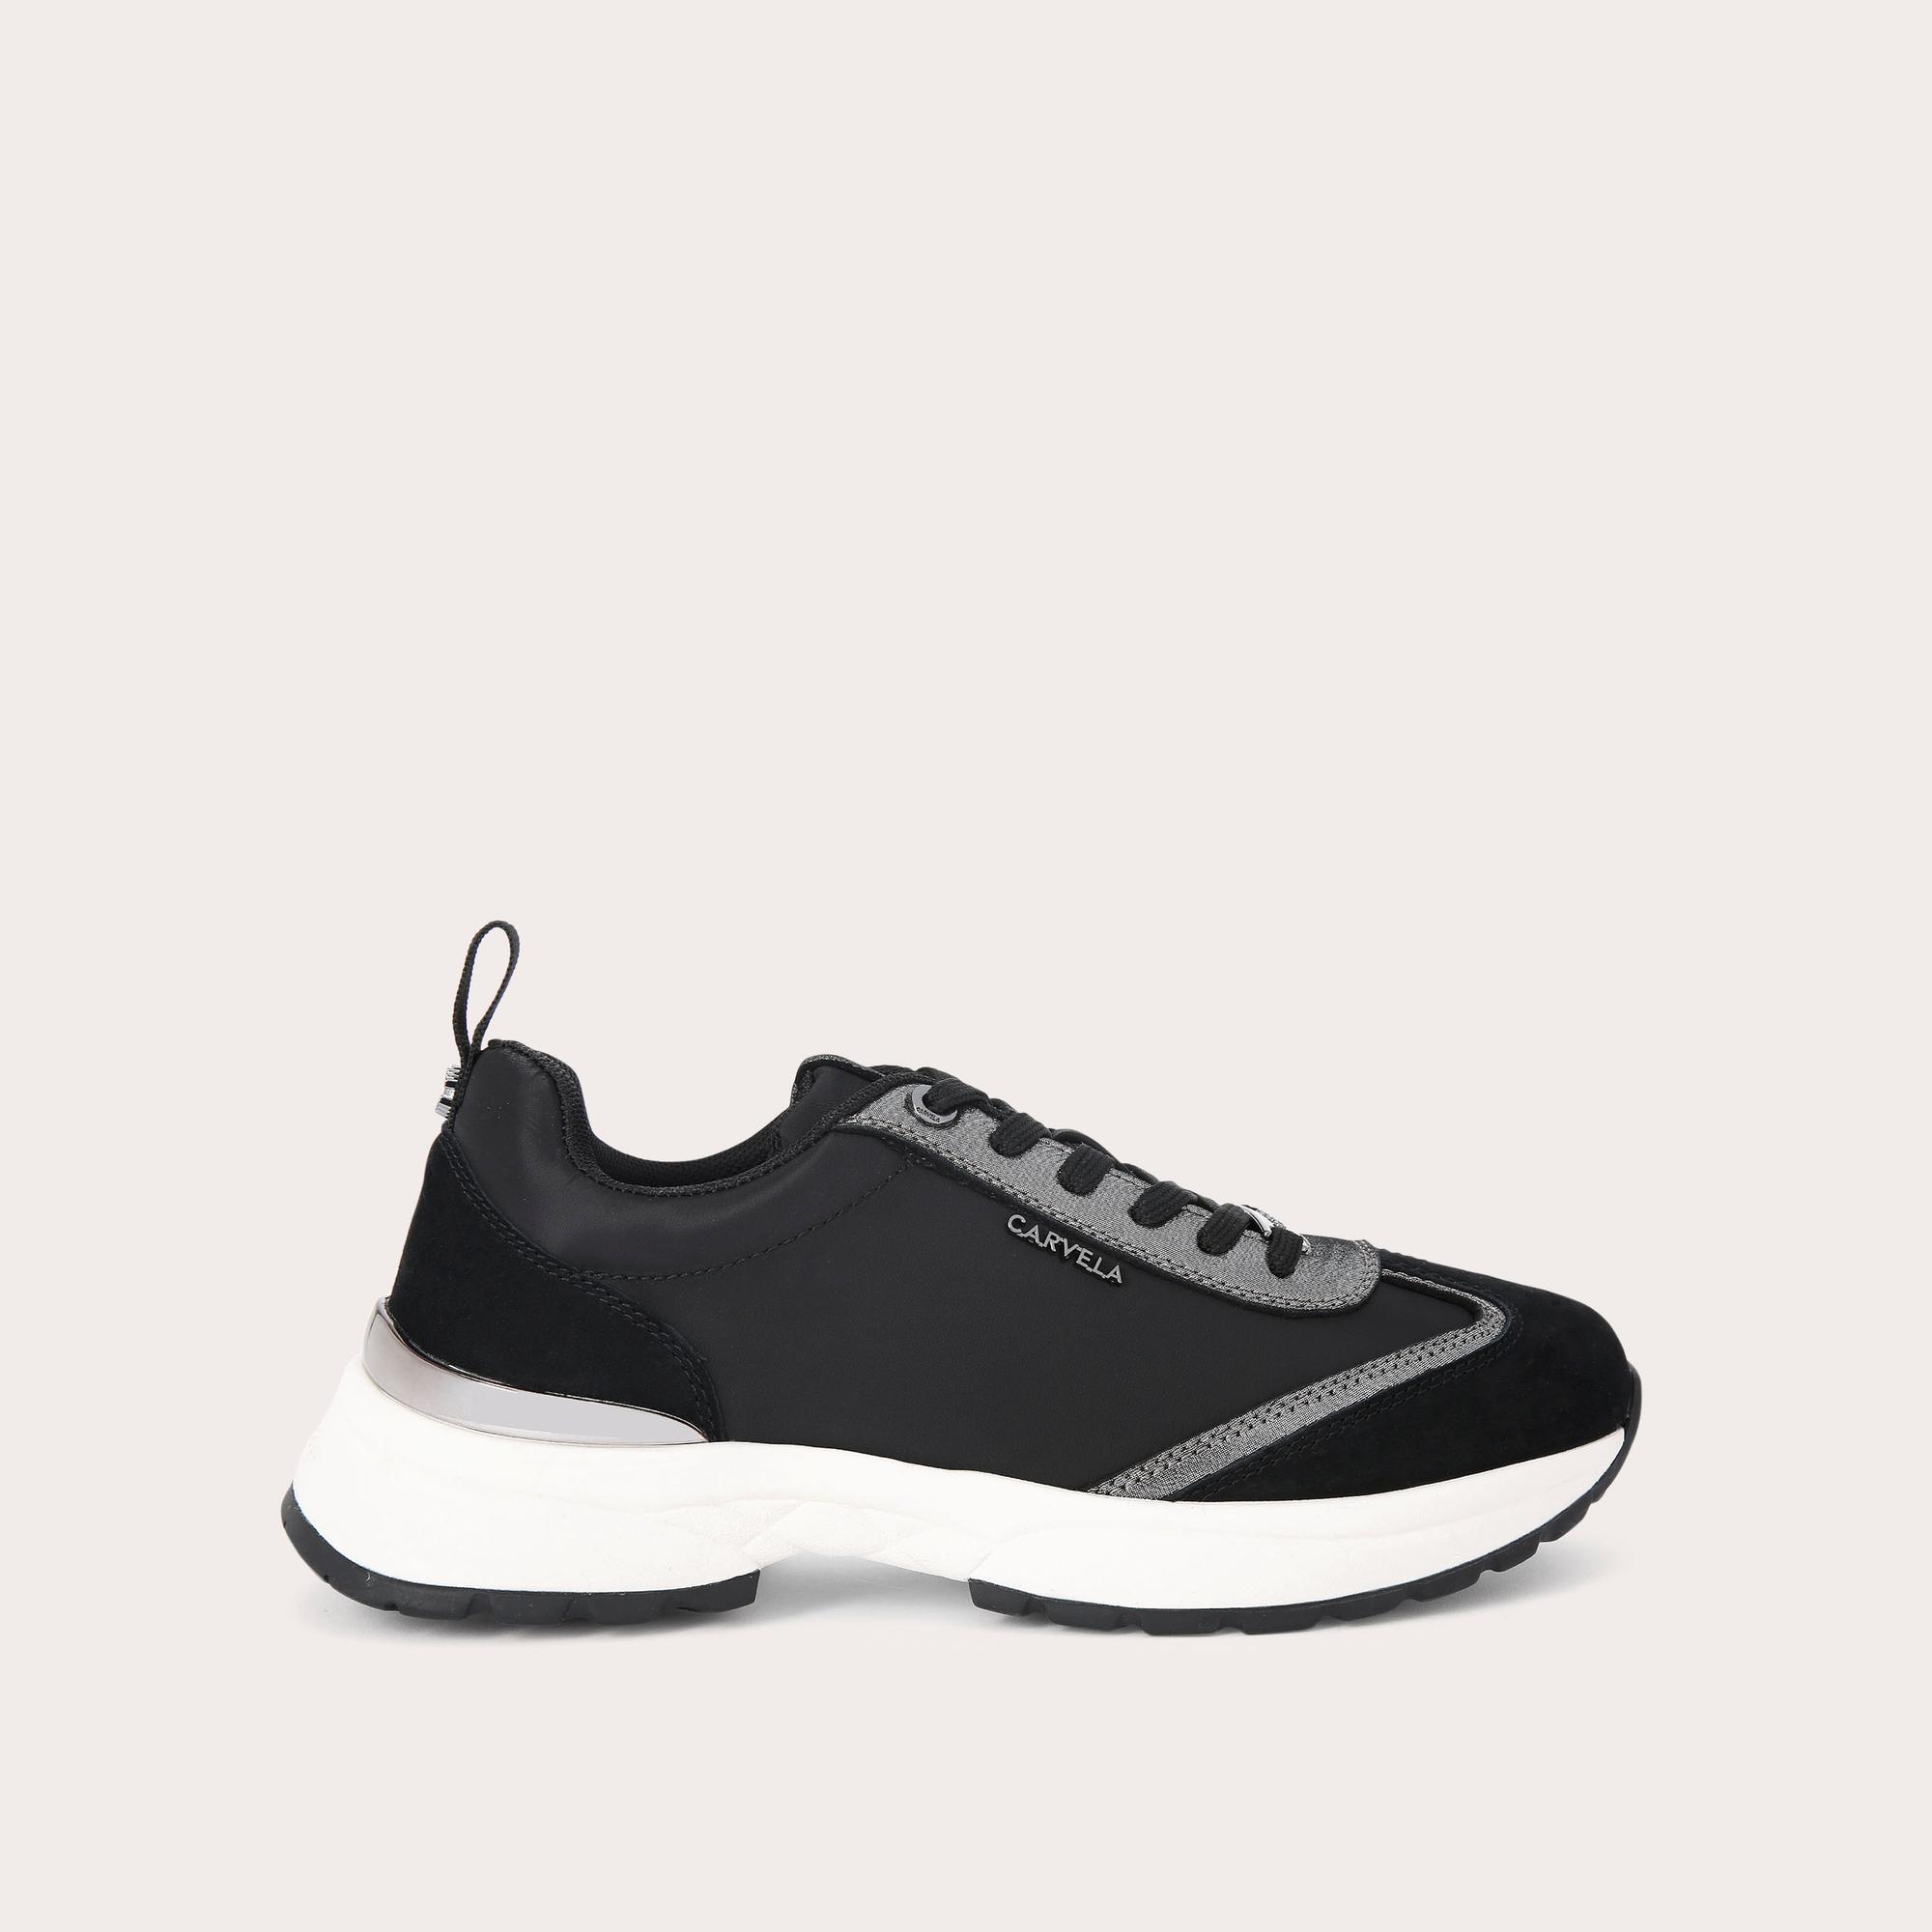 Women's Trainers High Tops, Sneakers Casual Trainers | Carvela